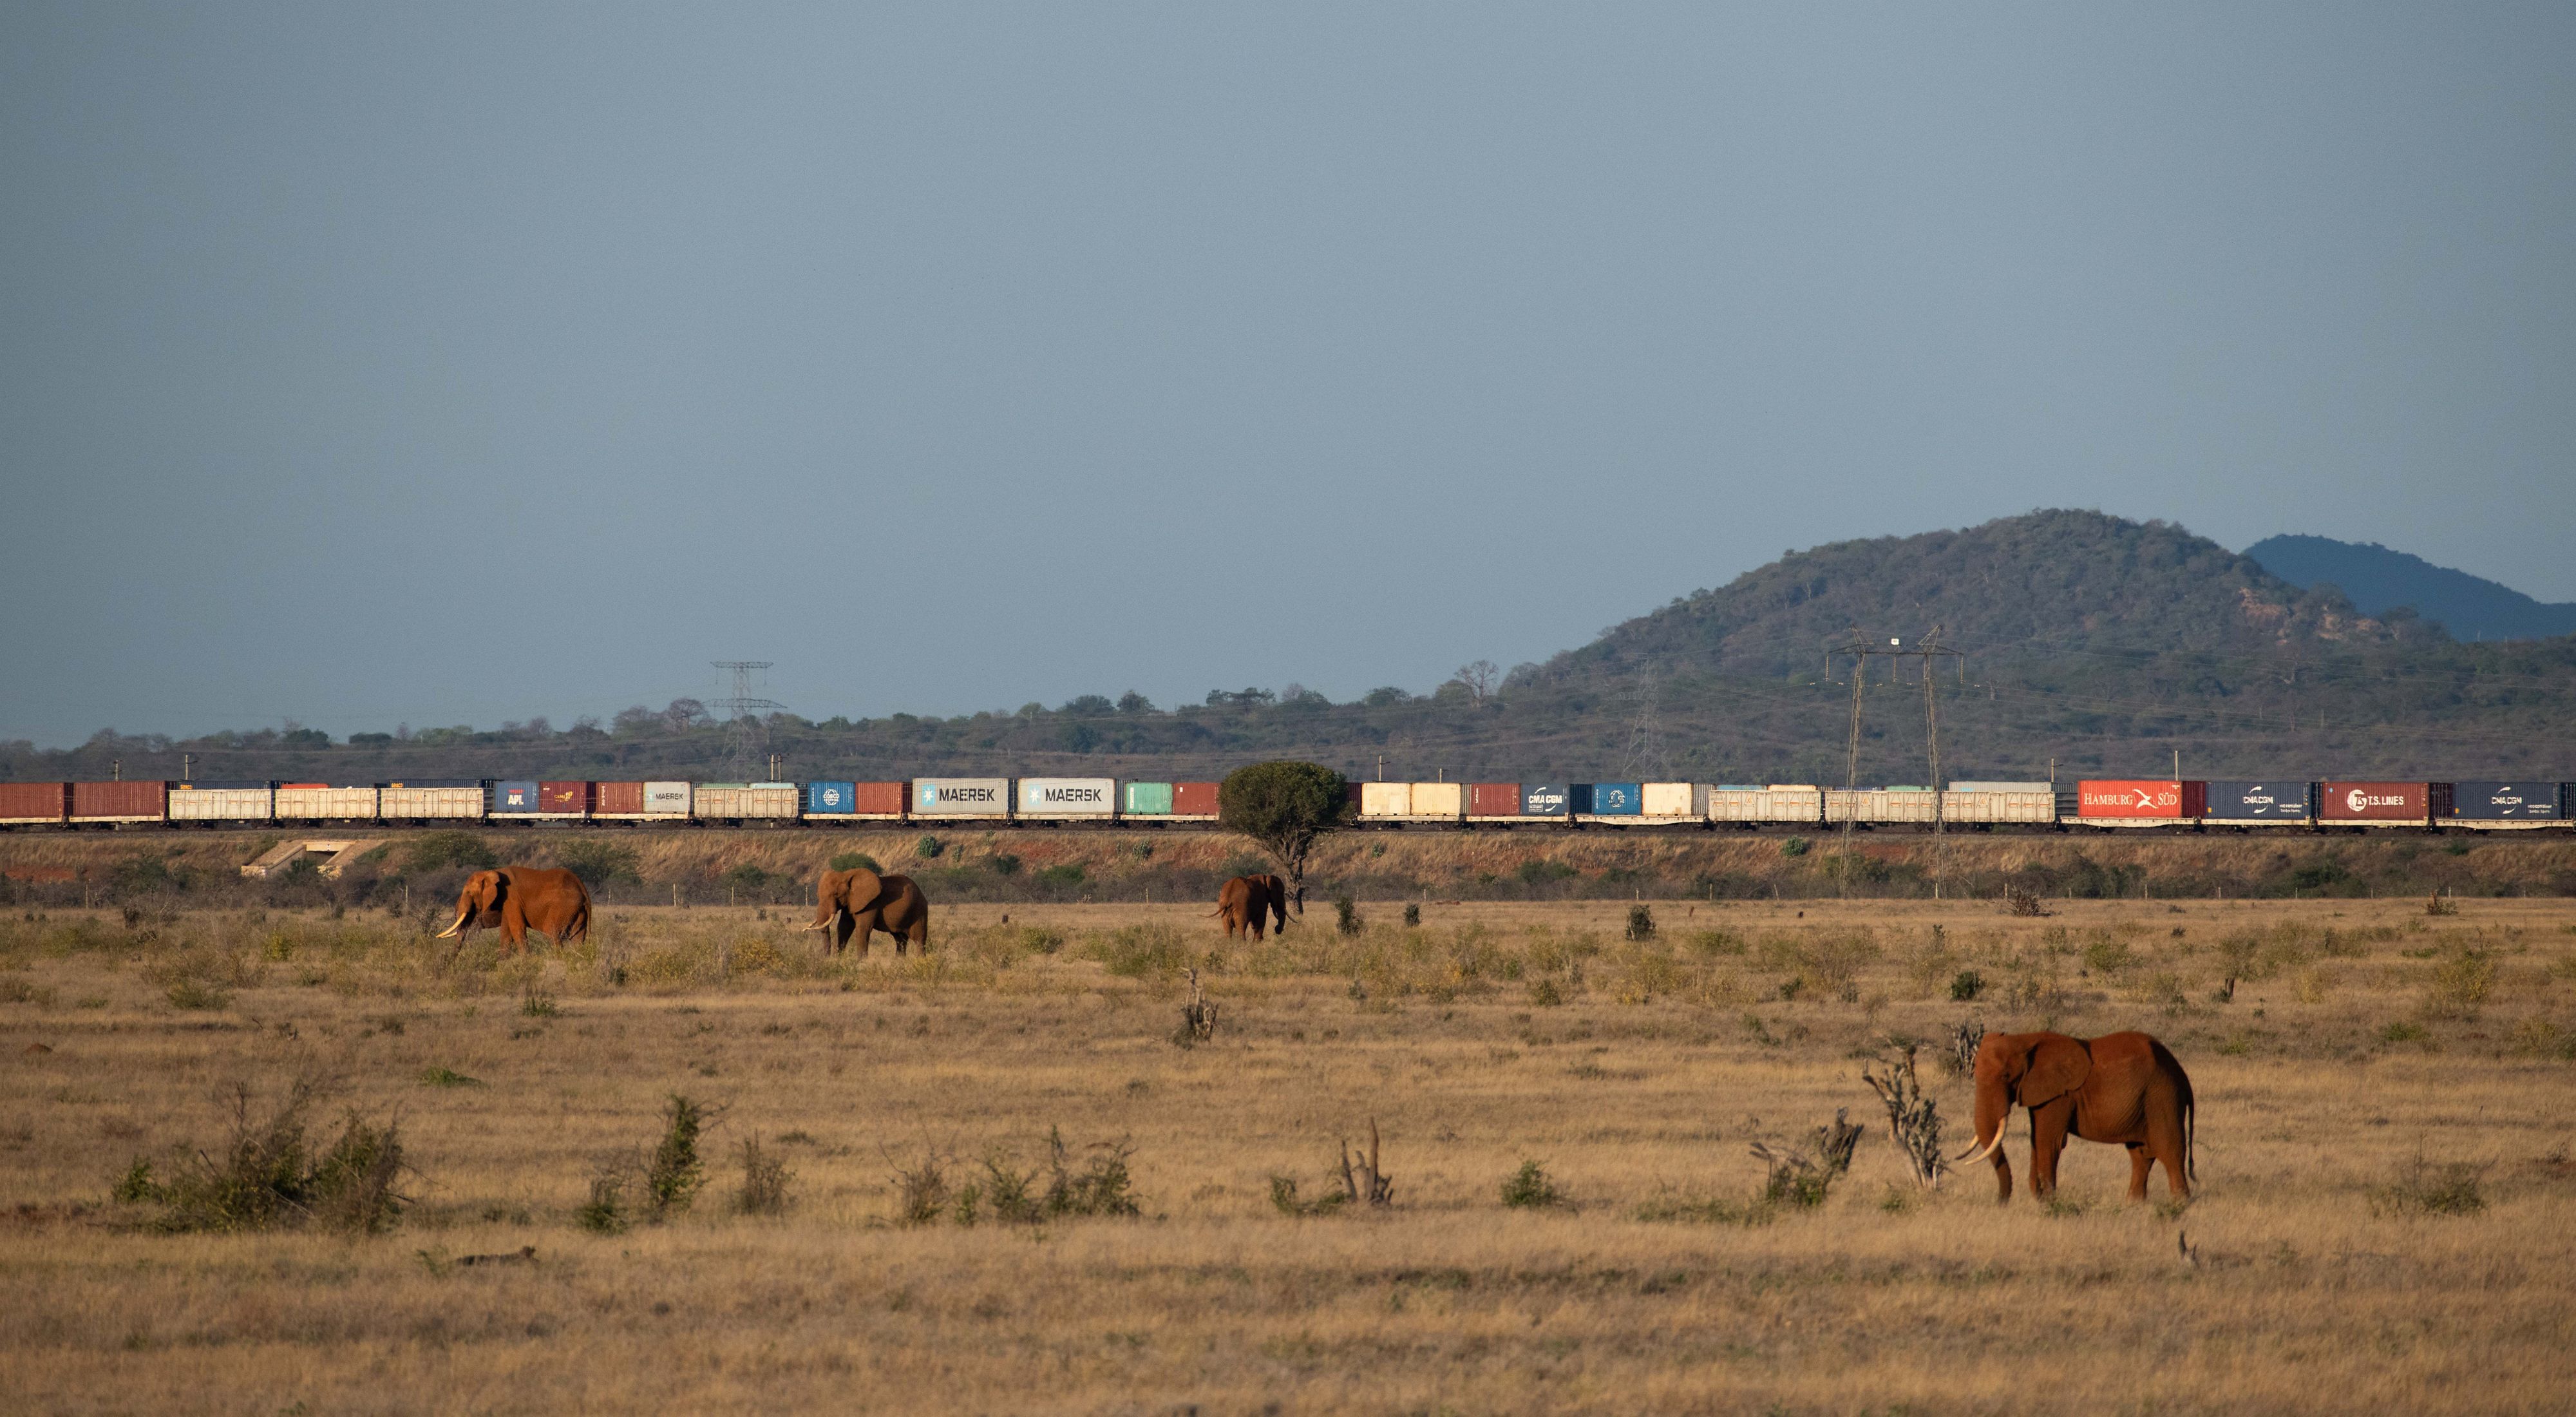 elephants grazing with a train passing in the background 